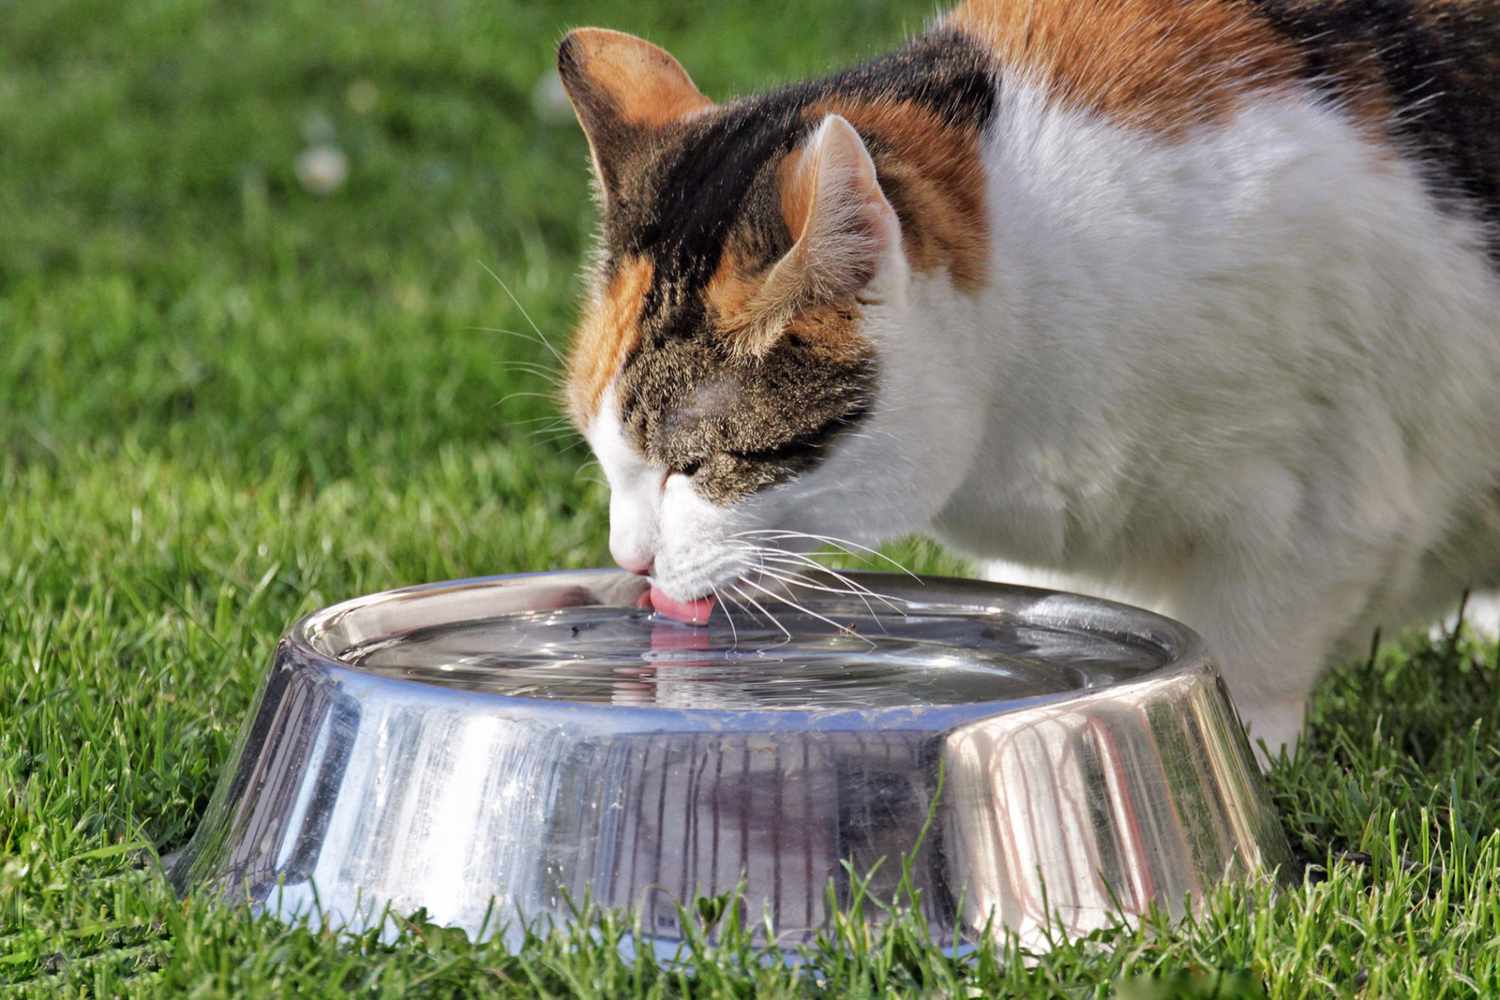 Cream calico cat drinks water out of metal bowl